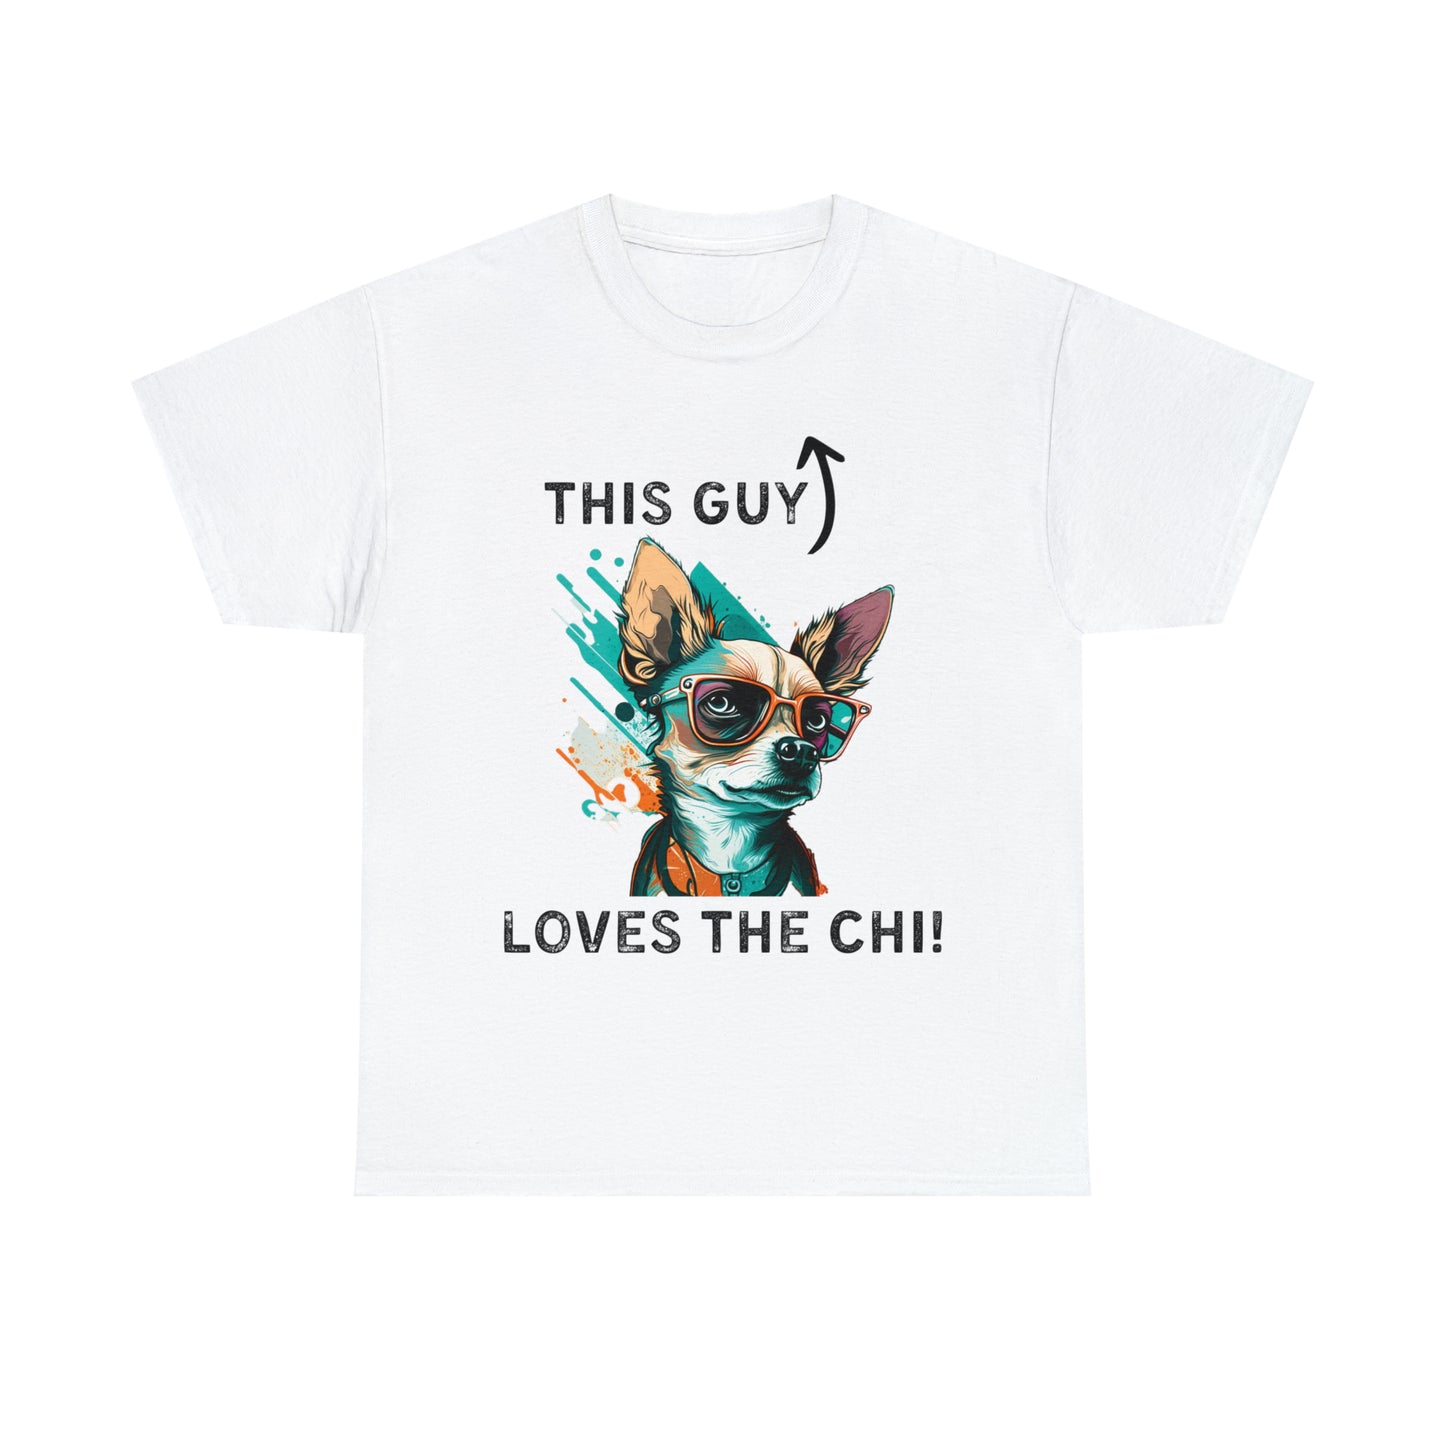 T-shirts for dog lovers